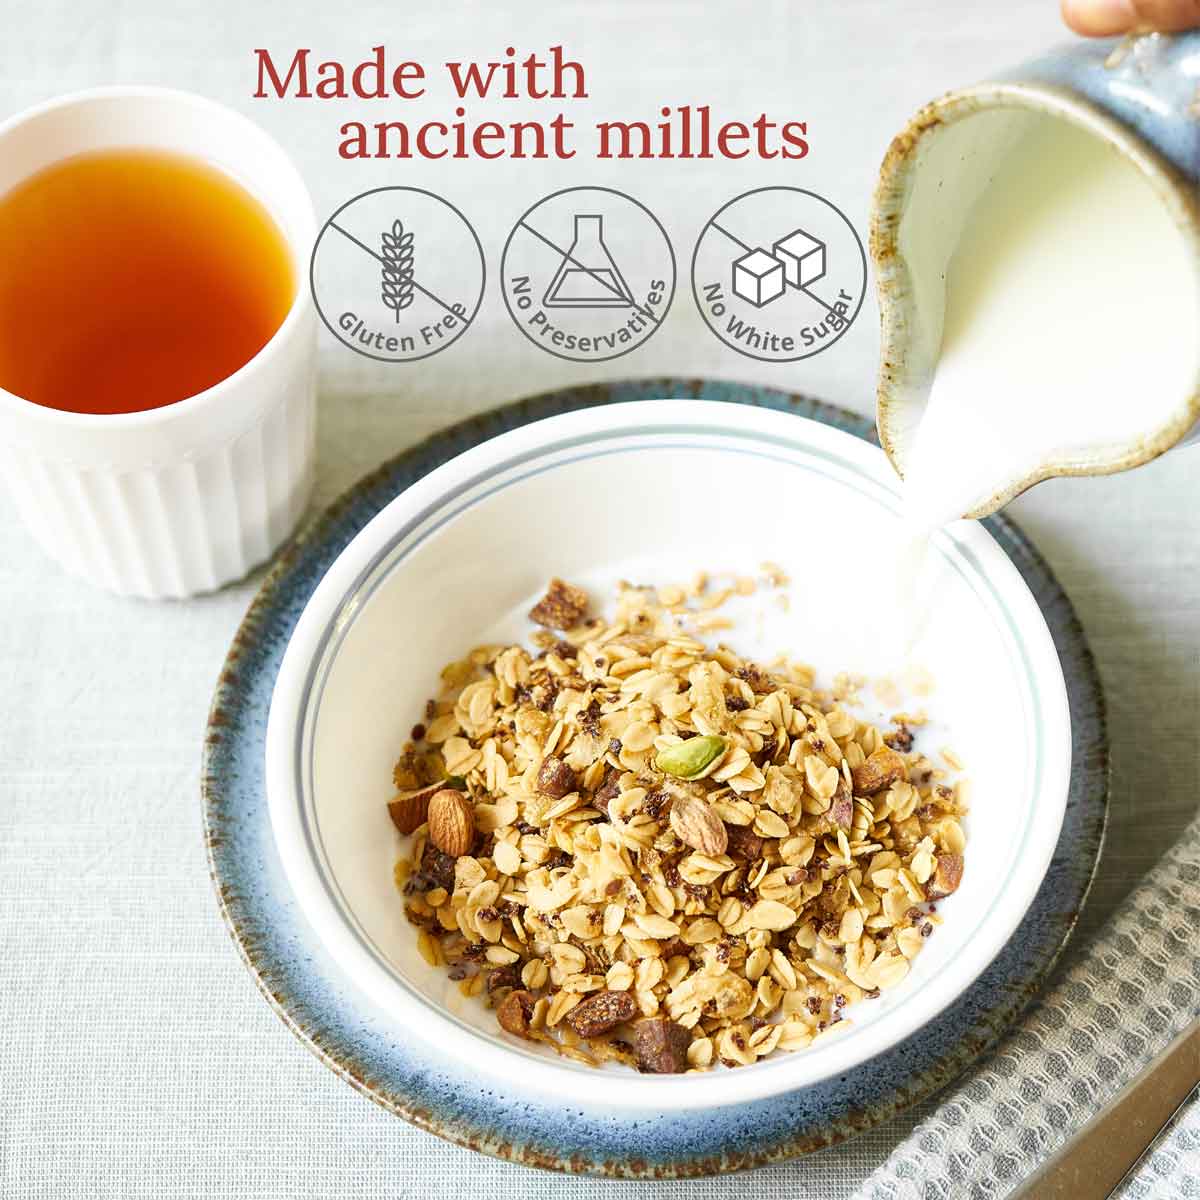 Toasted Millet Muesli: Fig and Honey with Salted Pistachios 1 Kg